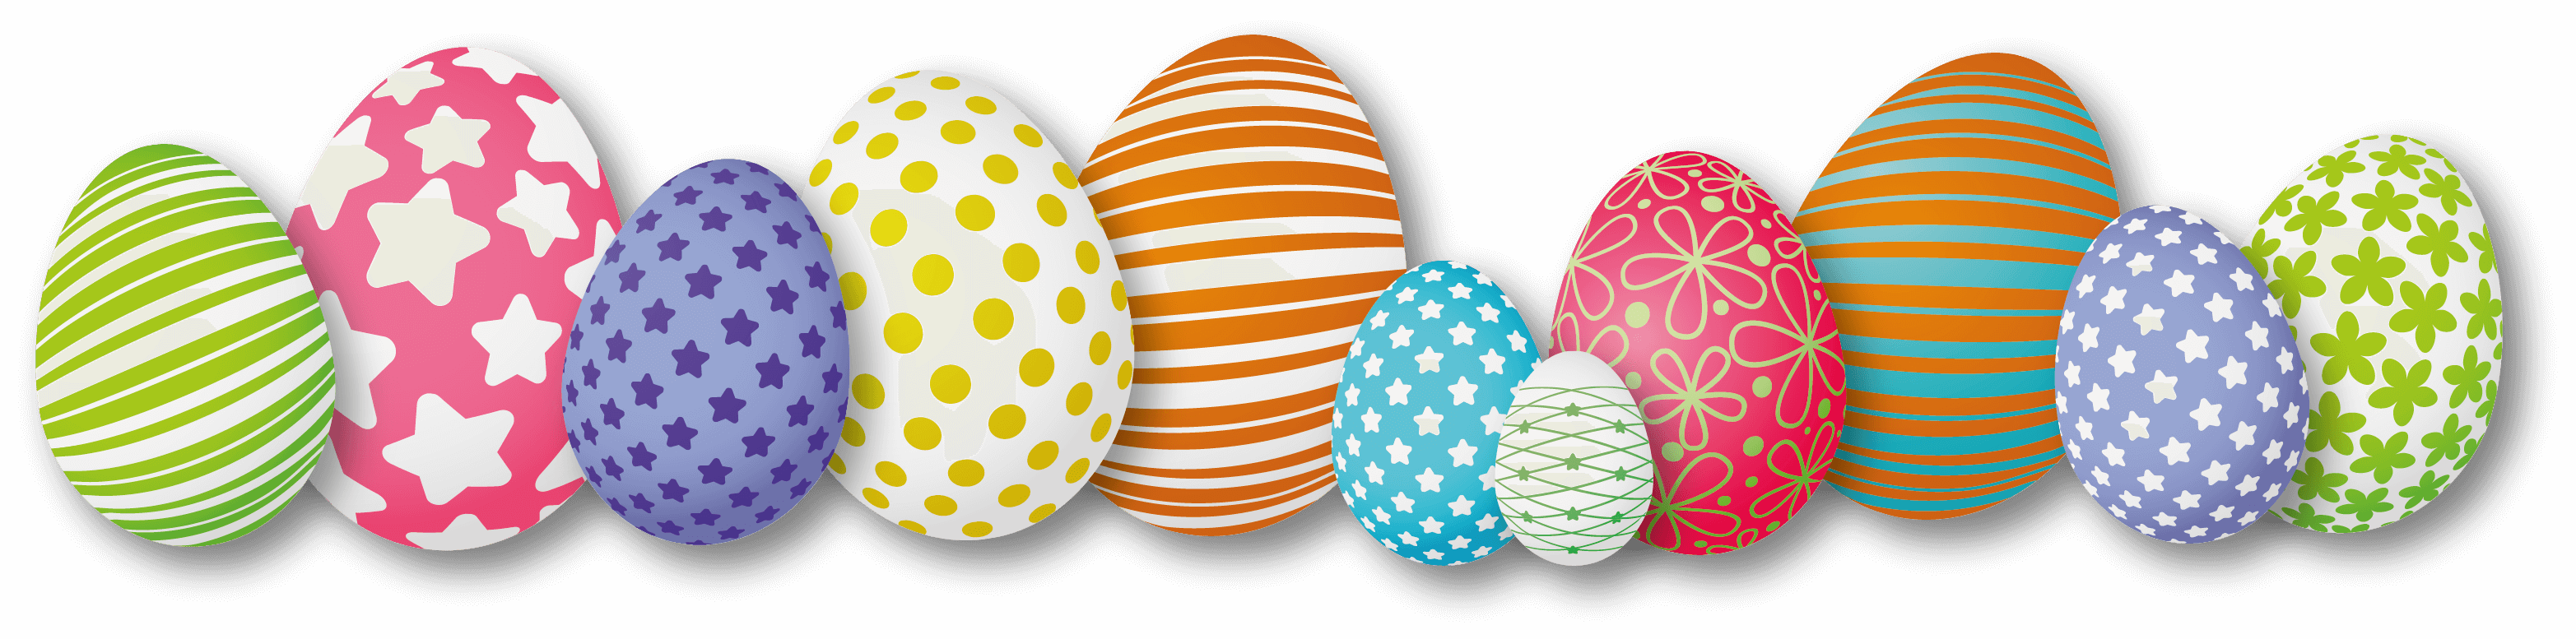 Easter Eggs Background PNG Image